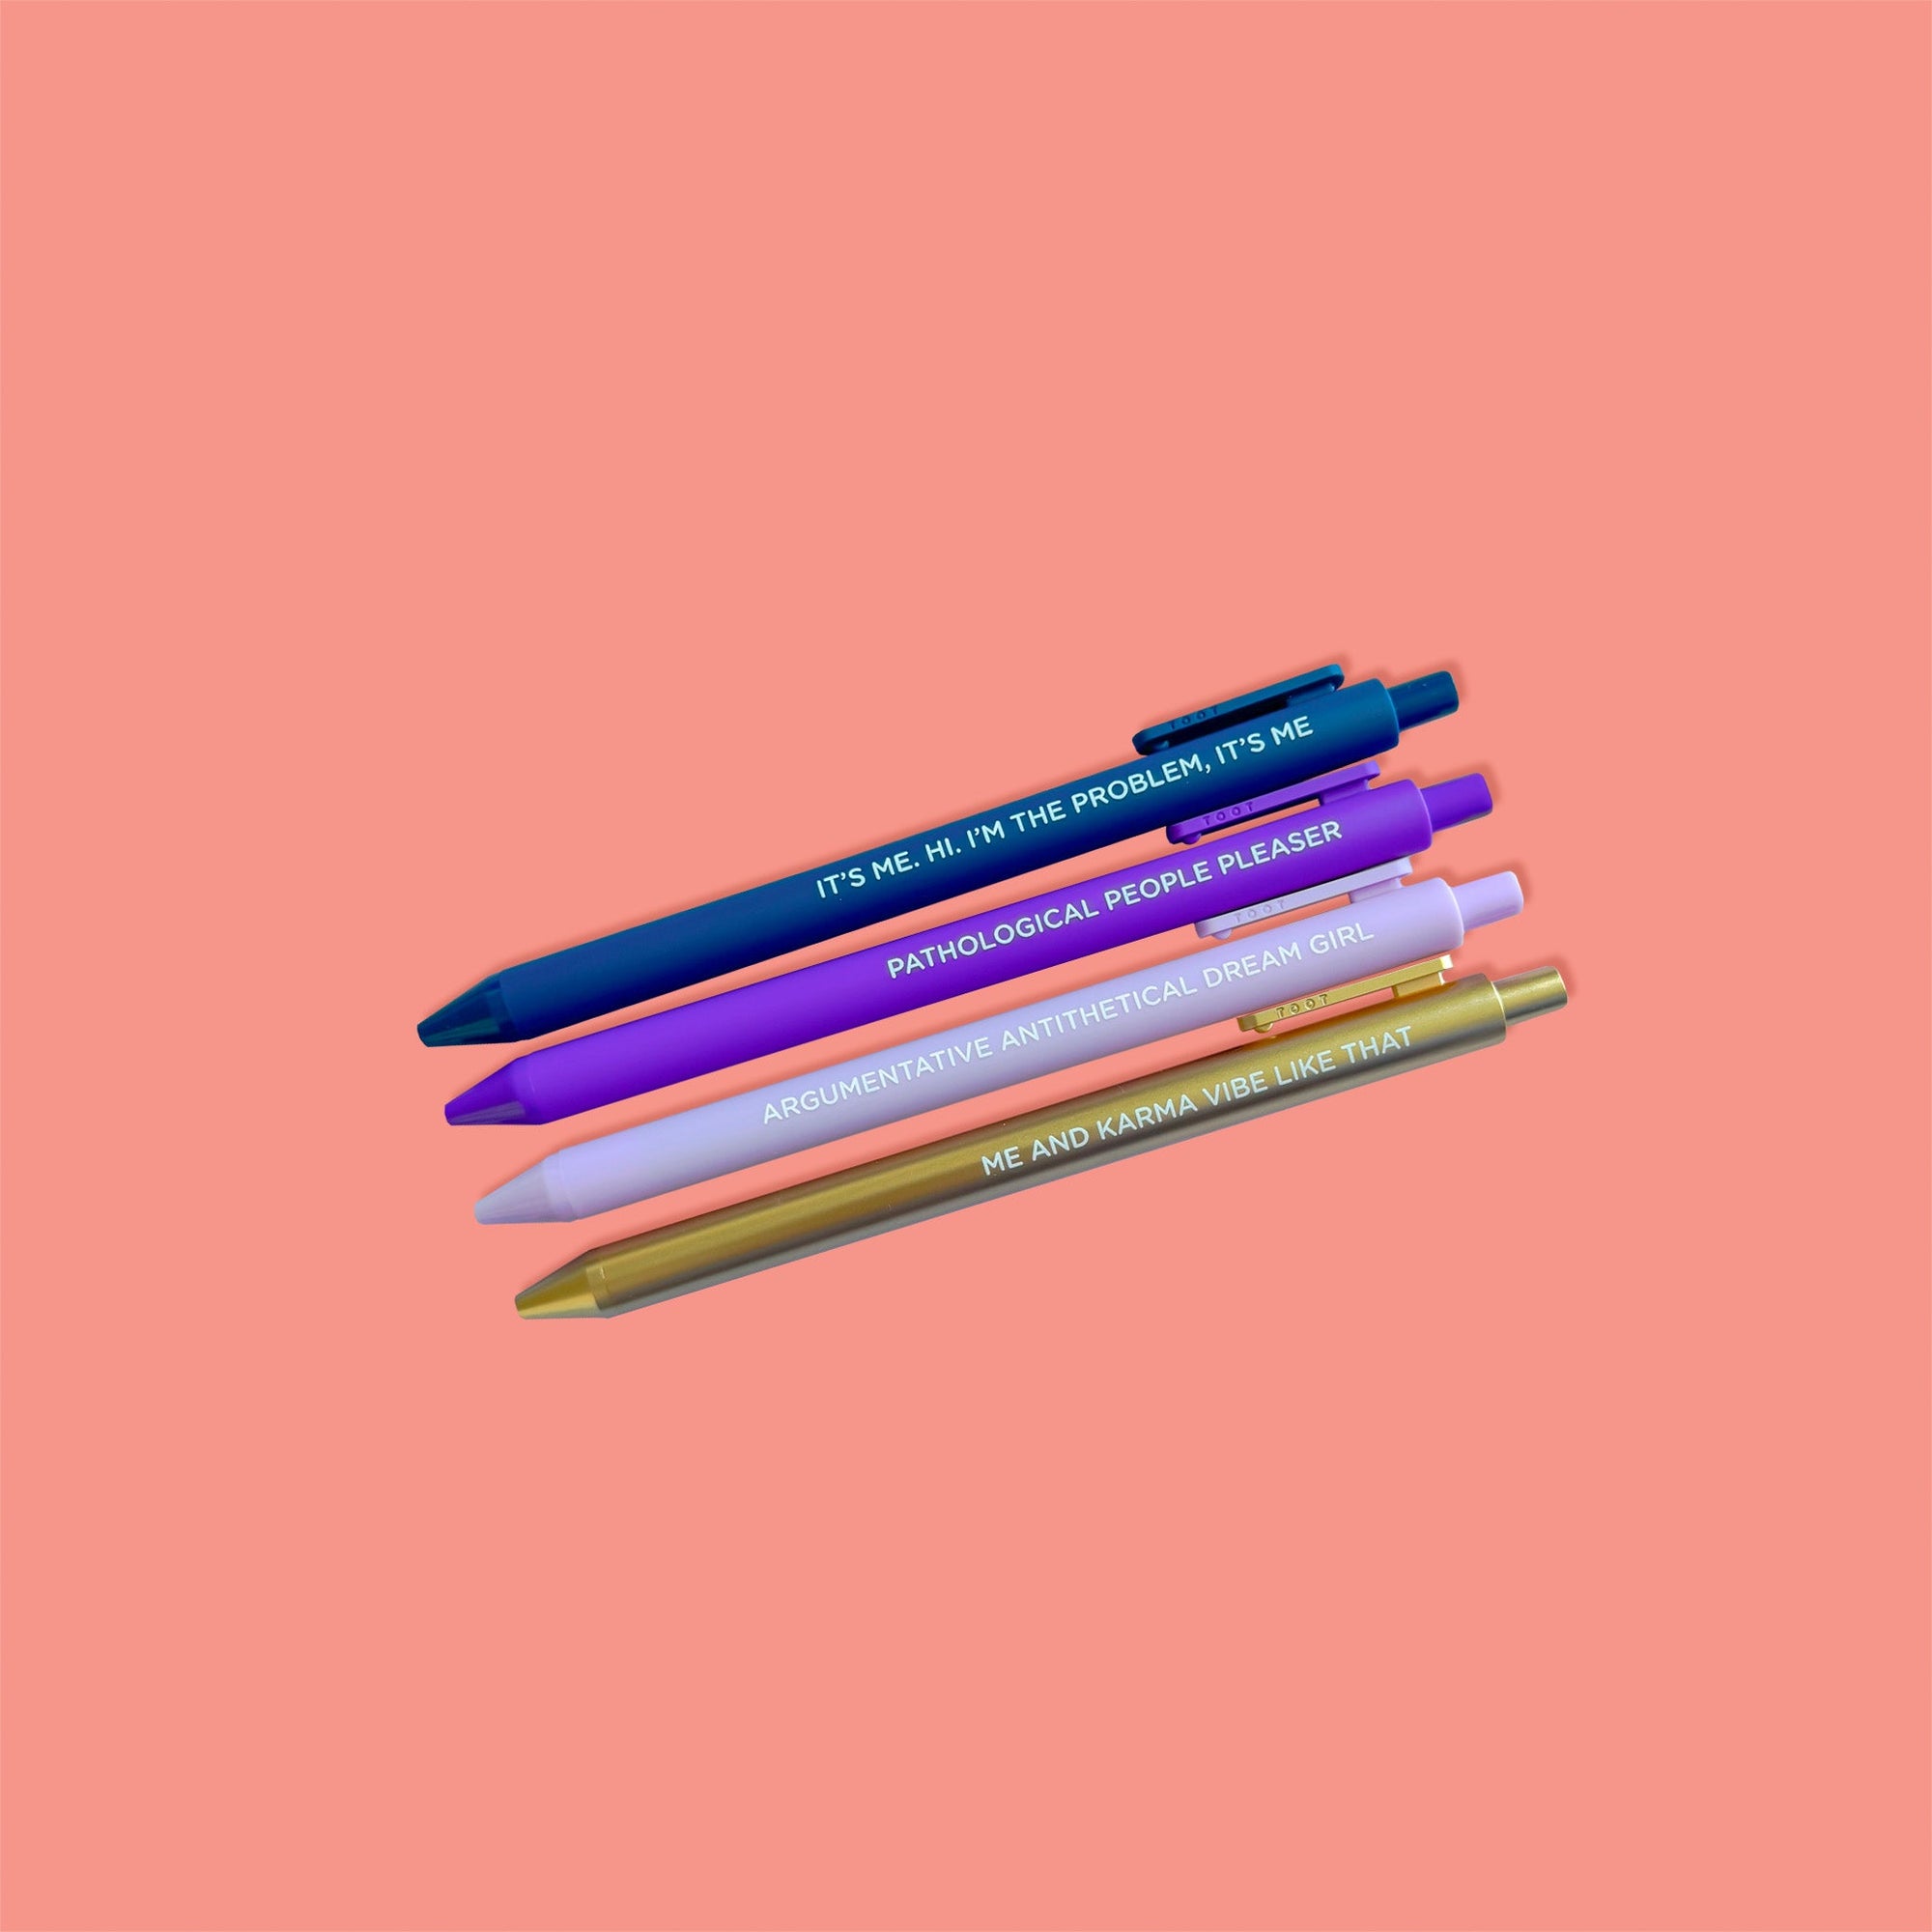 On a coral pink background sits a set of 4 pens. These Taylor Swift inspired pens are in colors of navy, purple, lavender, and gold. They say "IT'S ME, HI. I'M THE PROBLEM, IT'S ME", "PATHOLOGICAL PEOPLE PLEASER", " ARGUMENTATIVE ANTITHETICAL DREAM GIRL", "ME AND KARMA VIBE LIKE THAT."